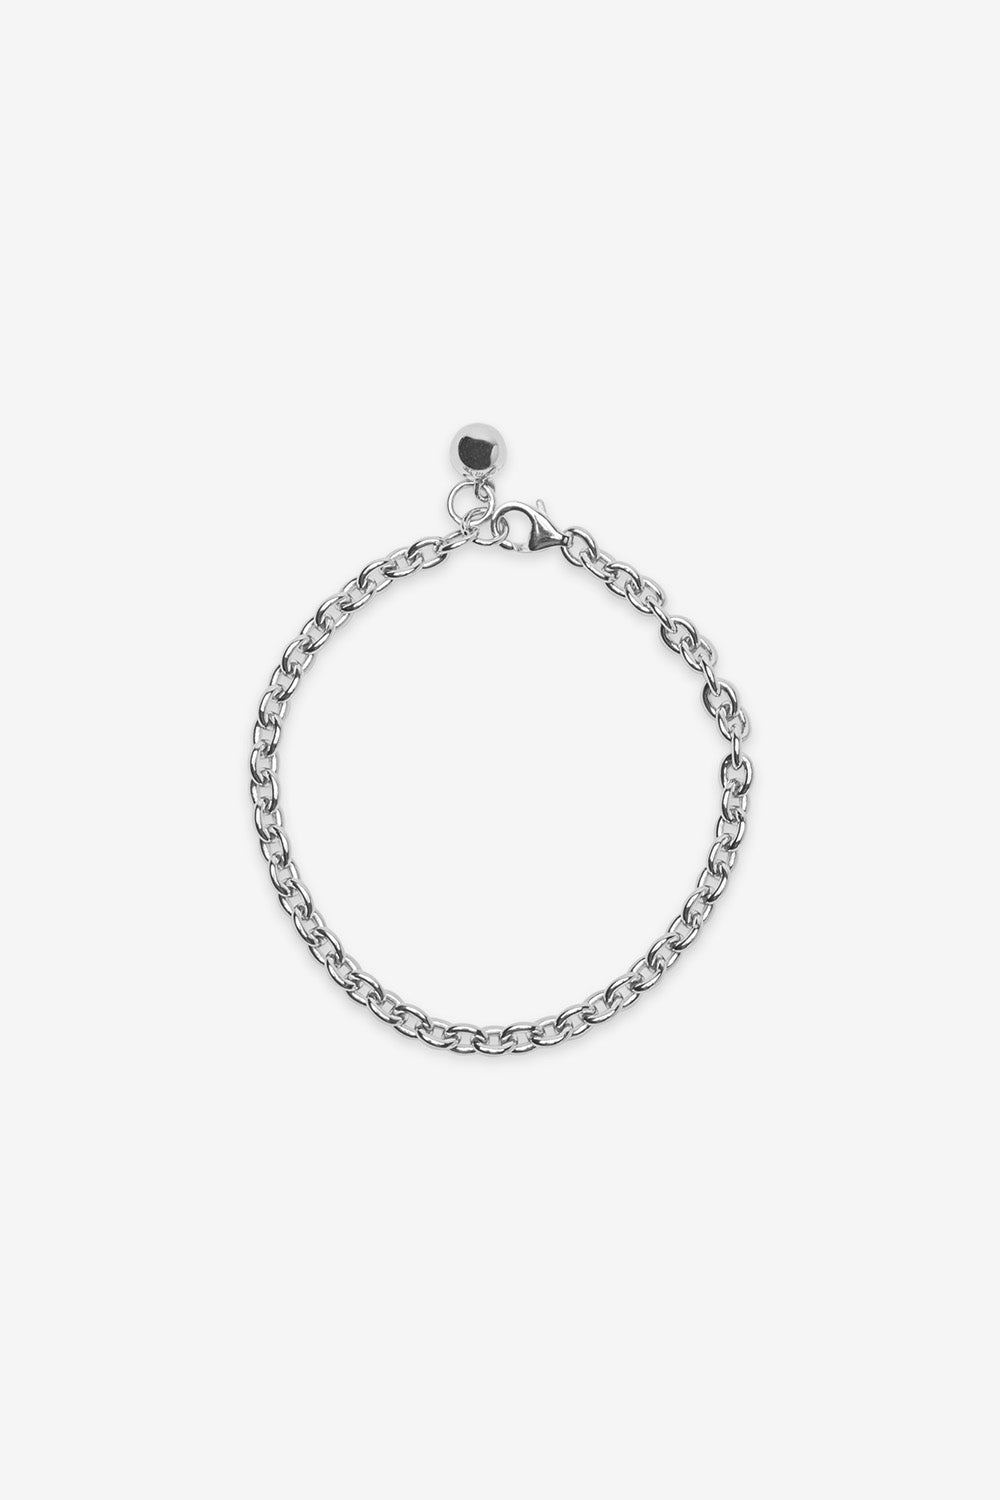 Seven Chain Bracelet - Recycled Sterling Silver